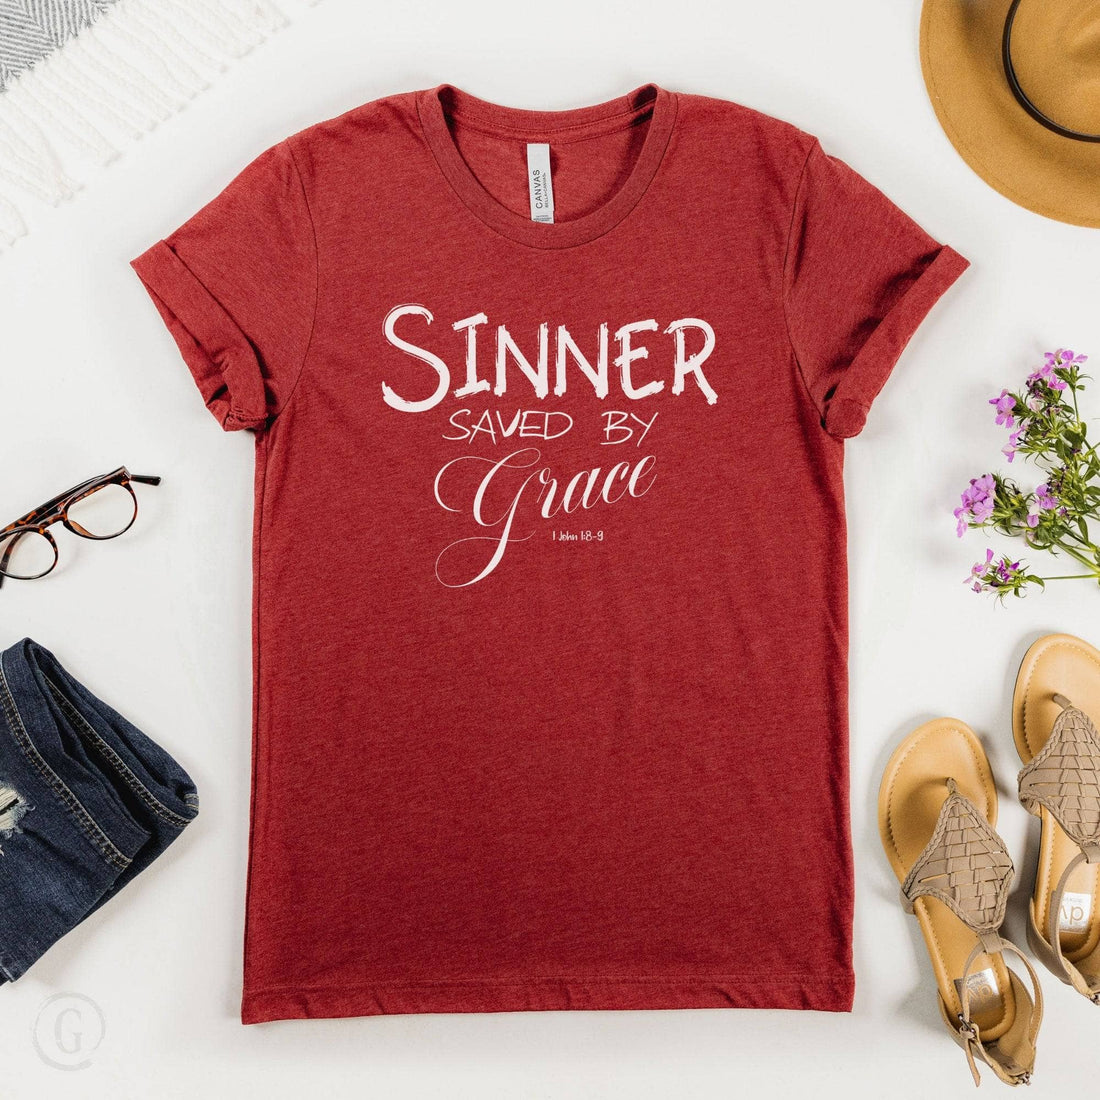 Sinner Saved By Grace 1 John 1:8-9 Unisex T-Shirt Heathers Heather Canvas Red